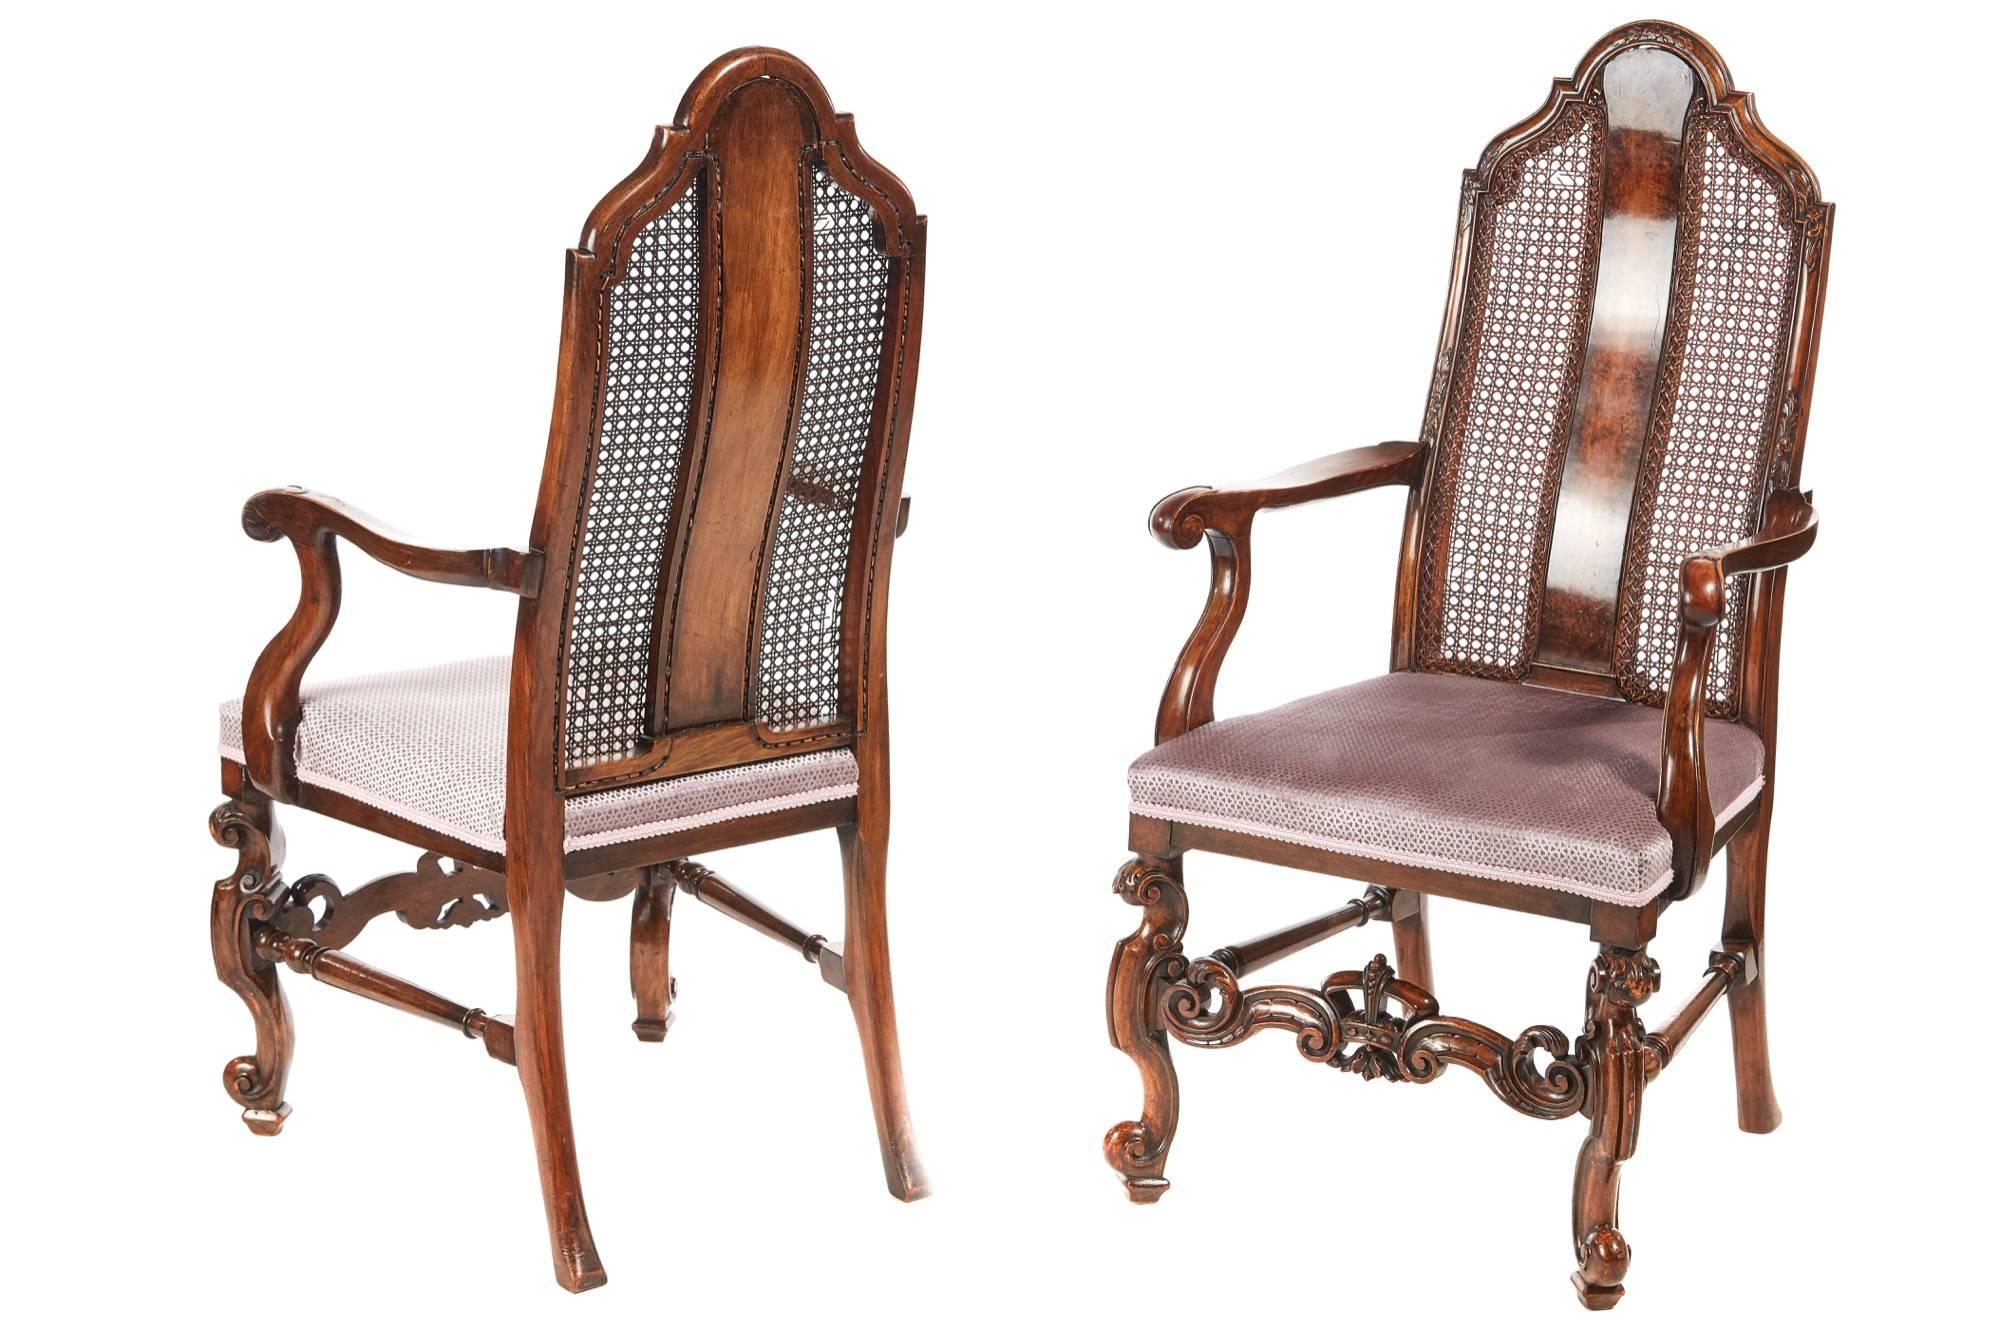 Fine set of eight antique burr walnut dining chairs, with fantastic burr walnut and bergere shaped backs, newly recovered seats, standing on fantastic shaped solid carved walnut cabriole legs to the front outswept back legs, united by turned